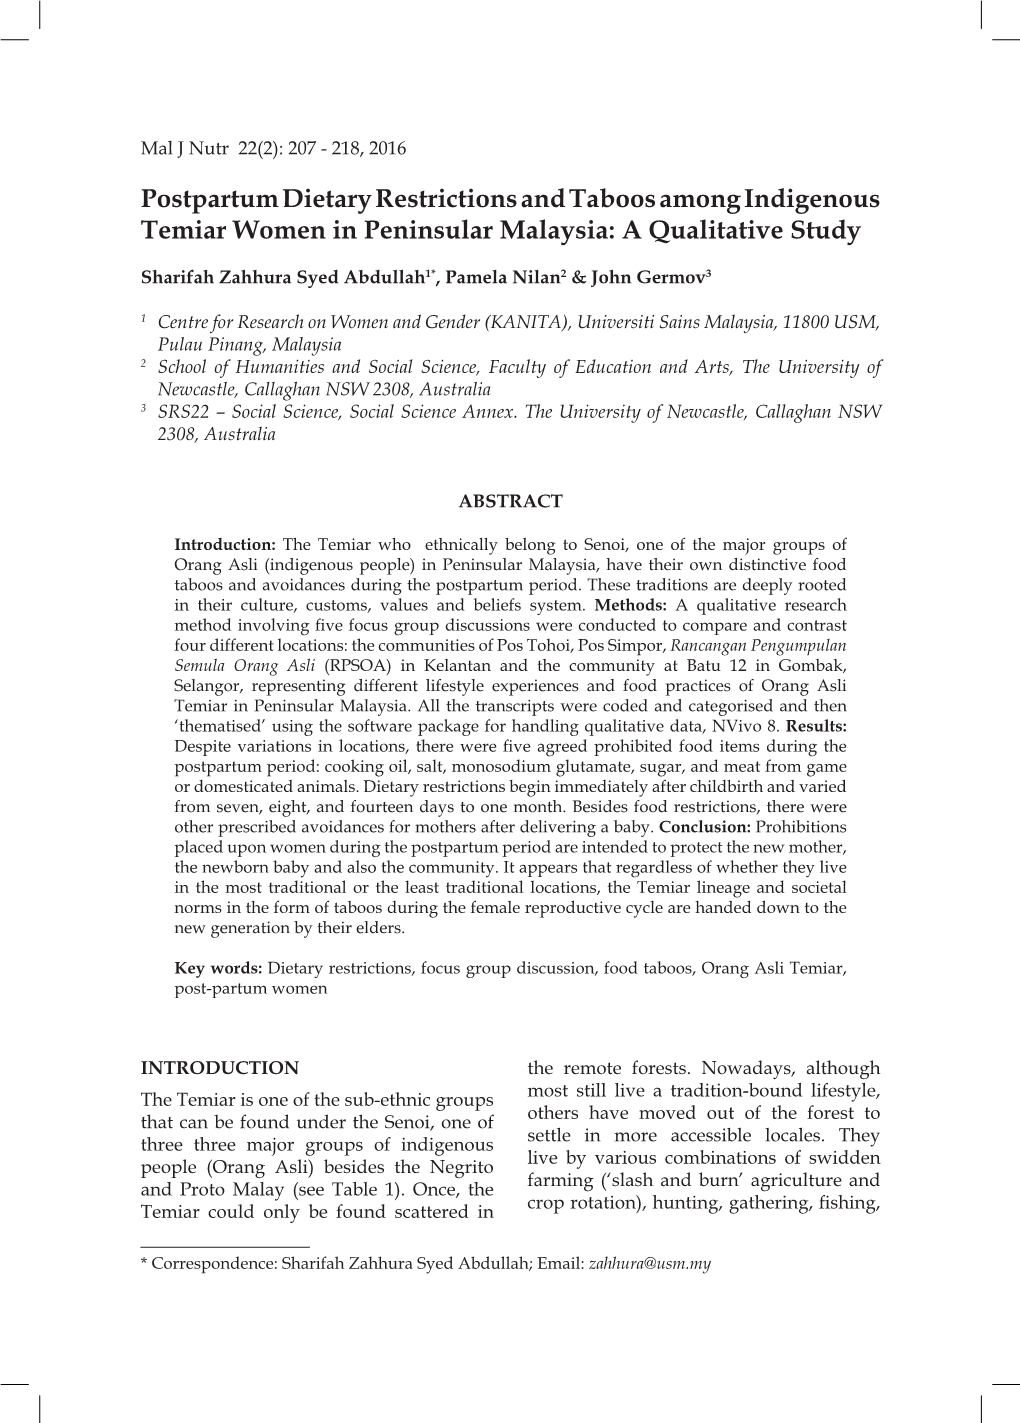 Postpartum Dietary Restrictions and Taboos Among Indigenous Temiar Women in Peninsular Malaysia: a Qualitative Study